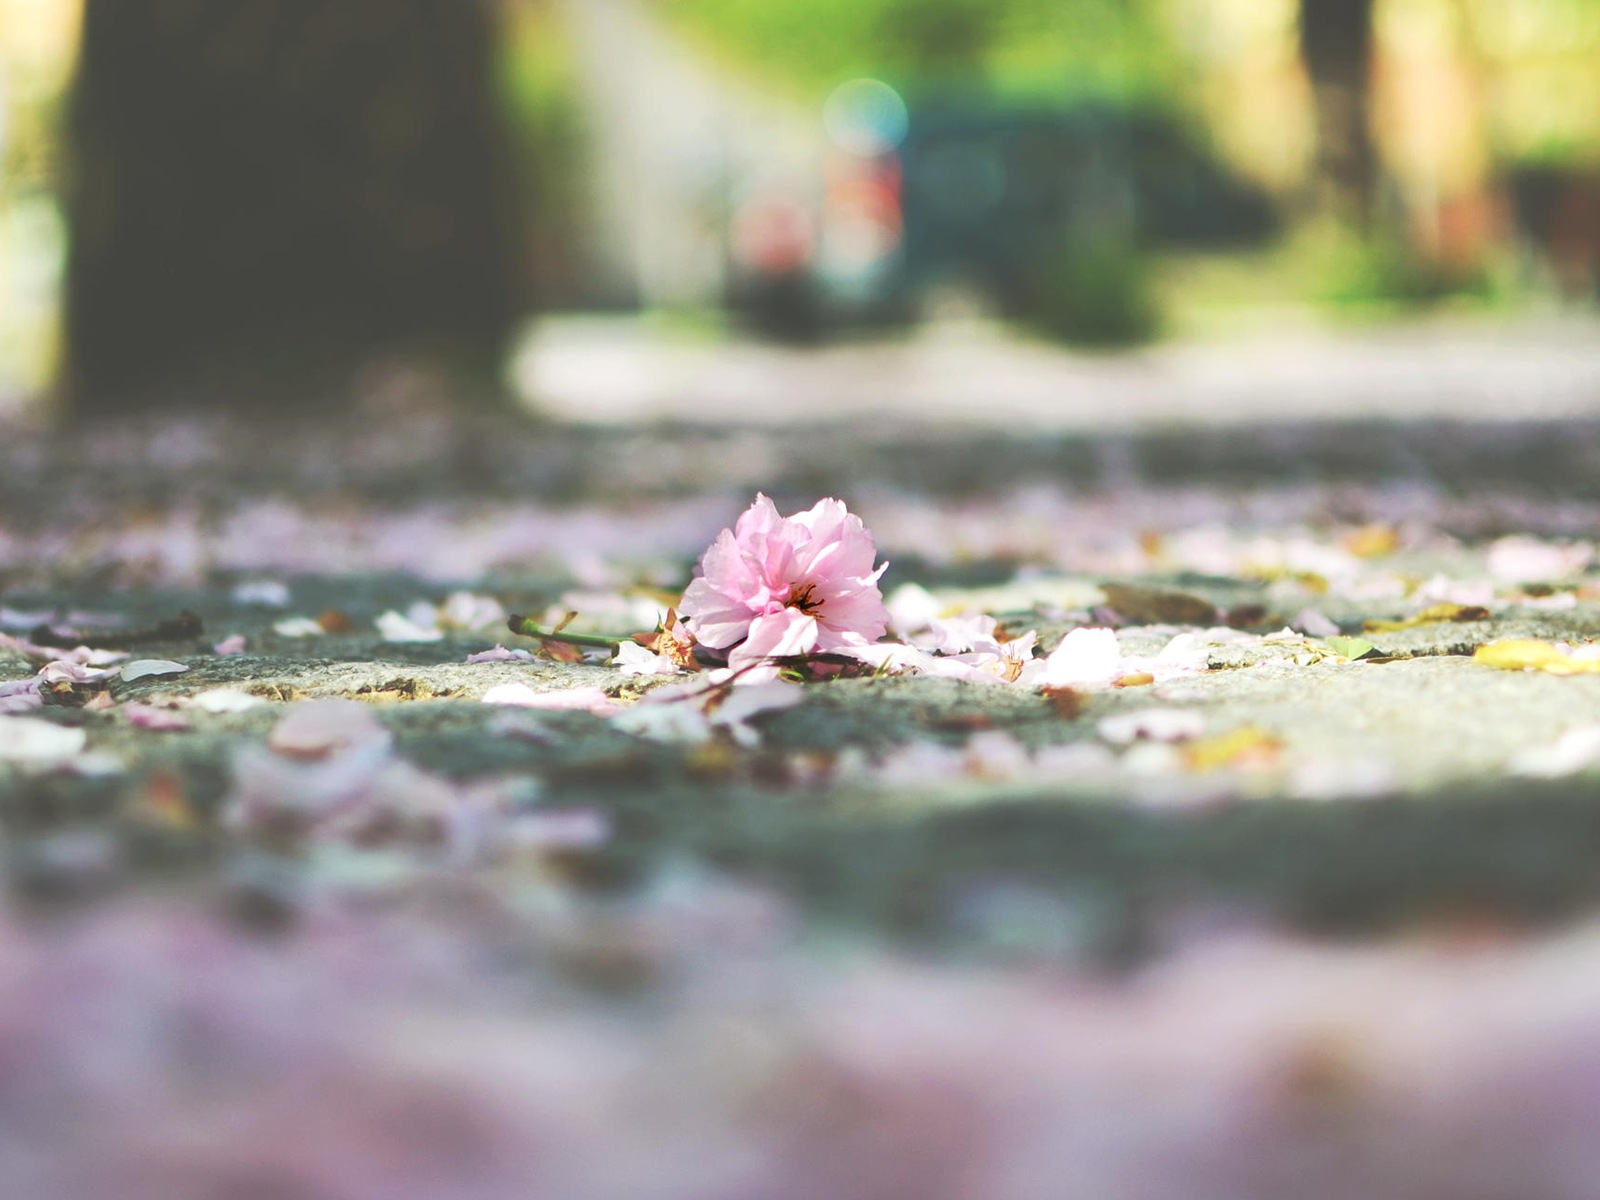 Flowers fall on ground, beautiful HD wallpapers #9 - 1600x1200